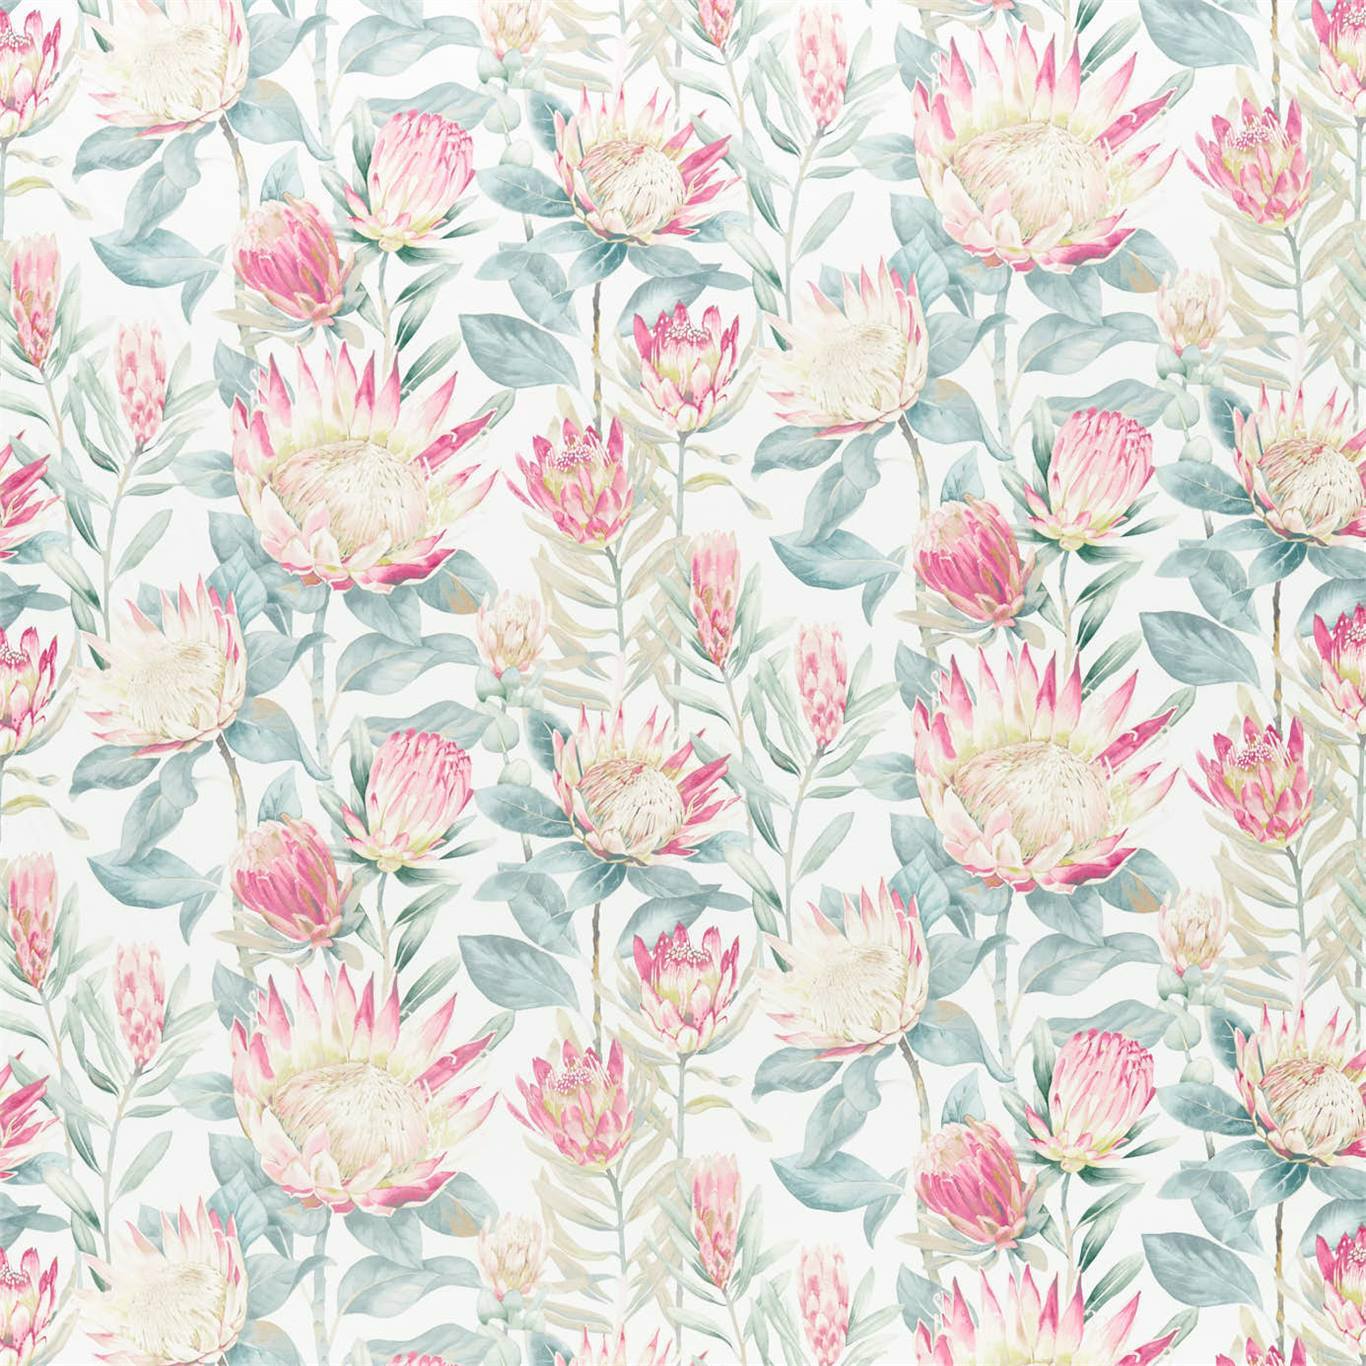 King Protea Fabric by Sanderson